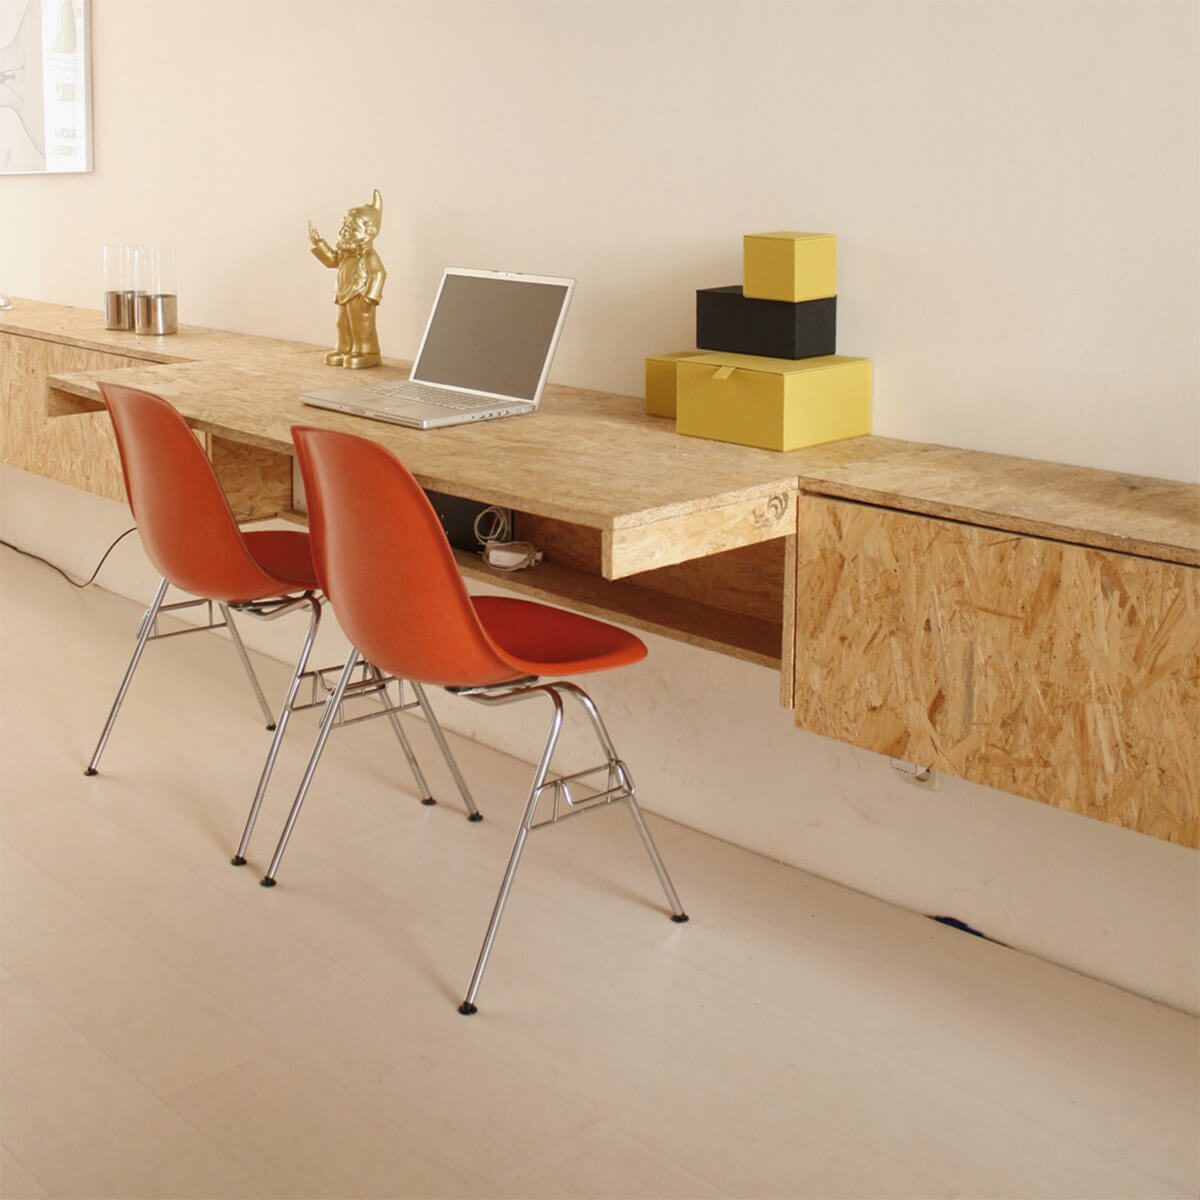 12 Ways to Get Creative with Plywood Furniture